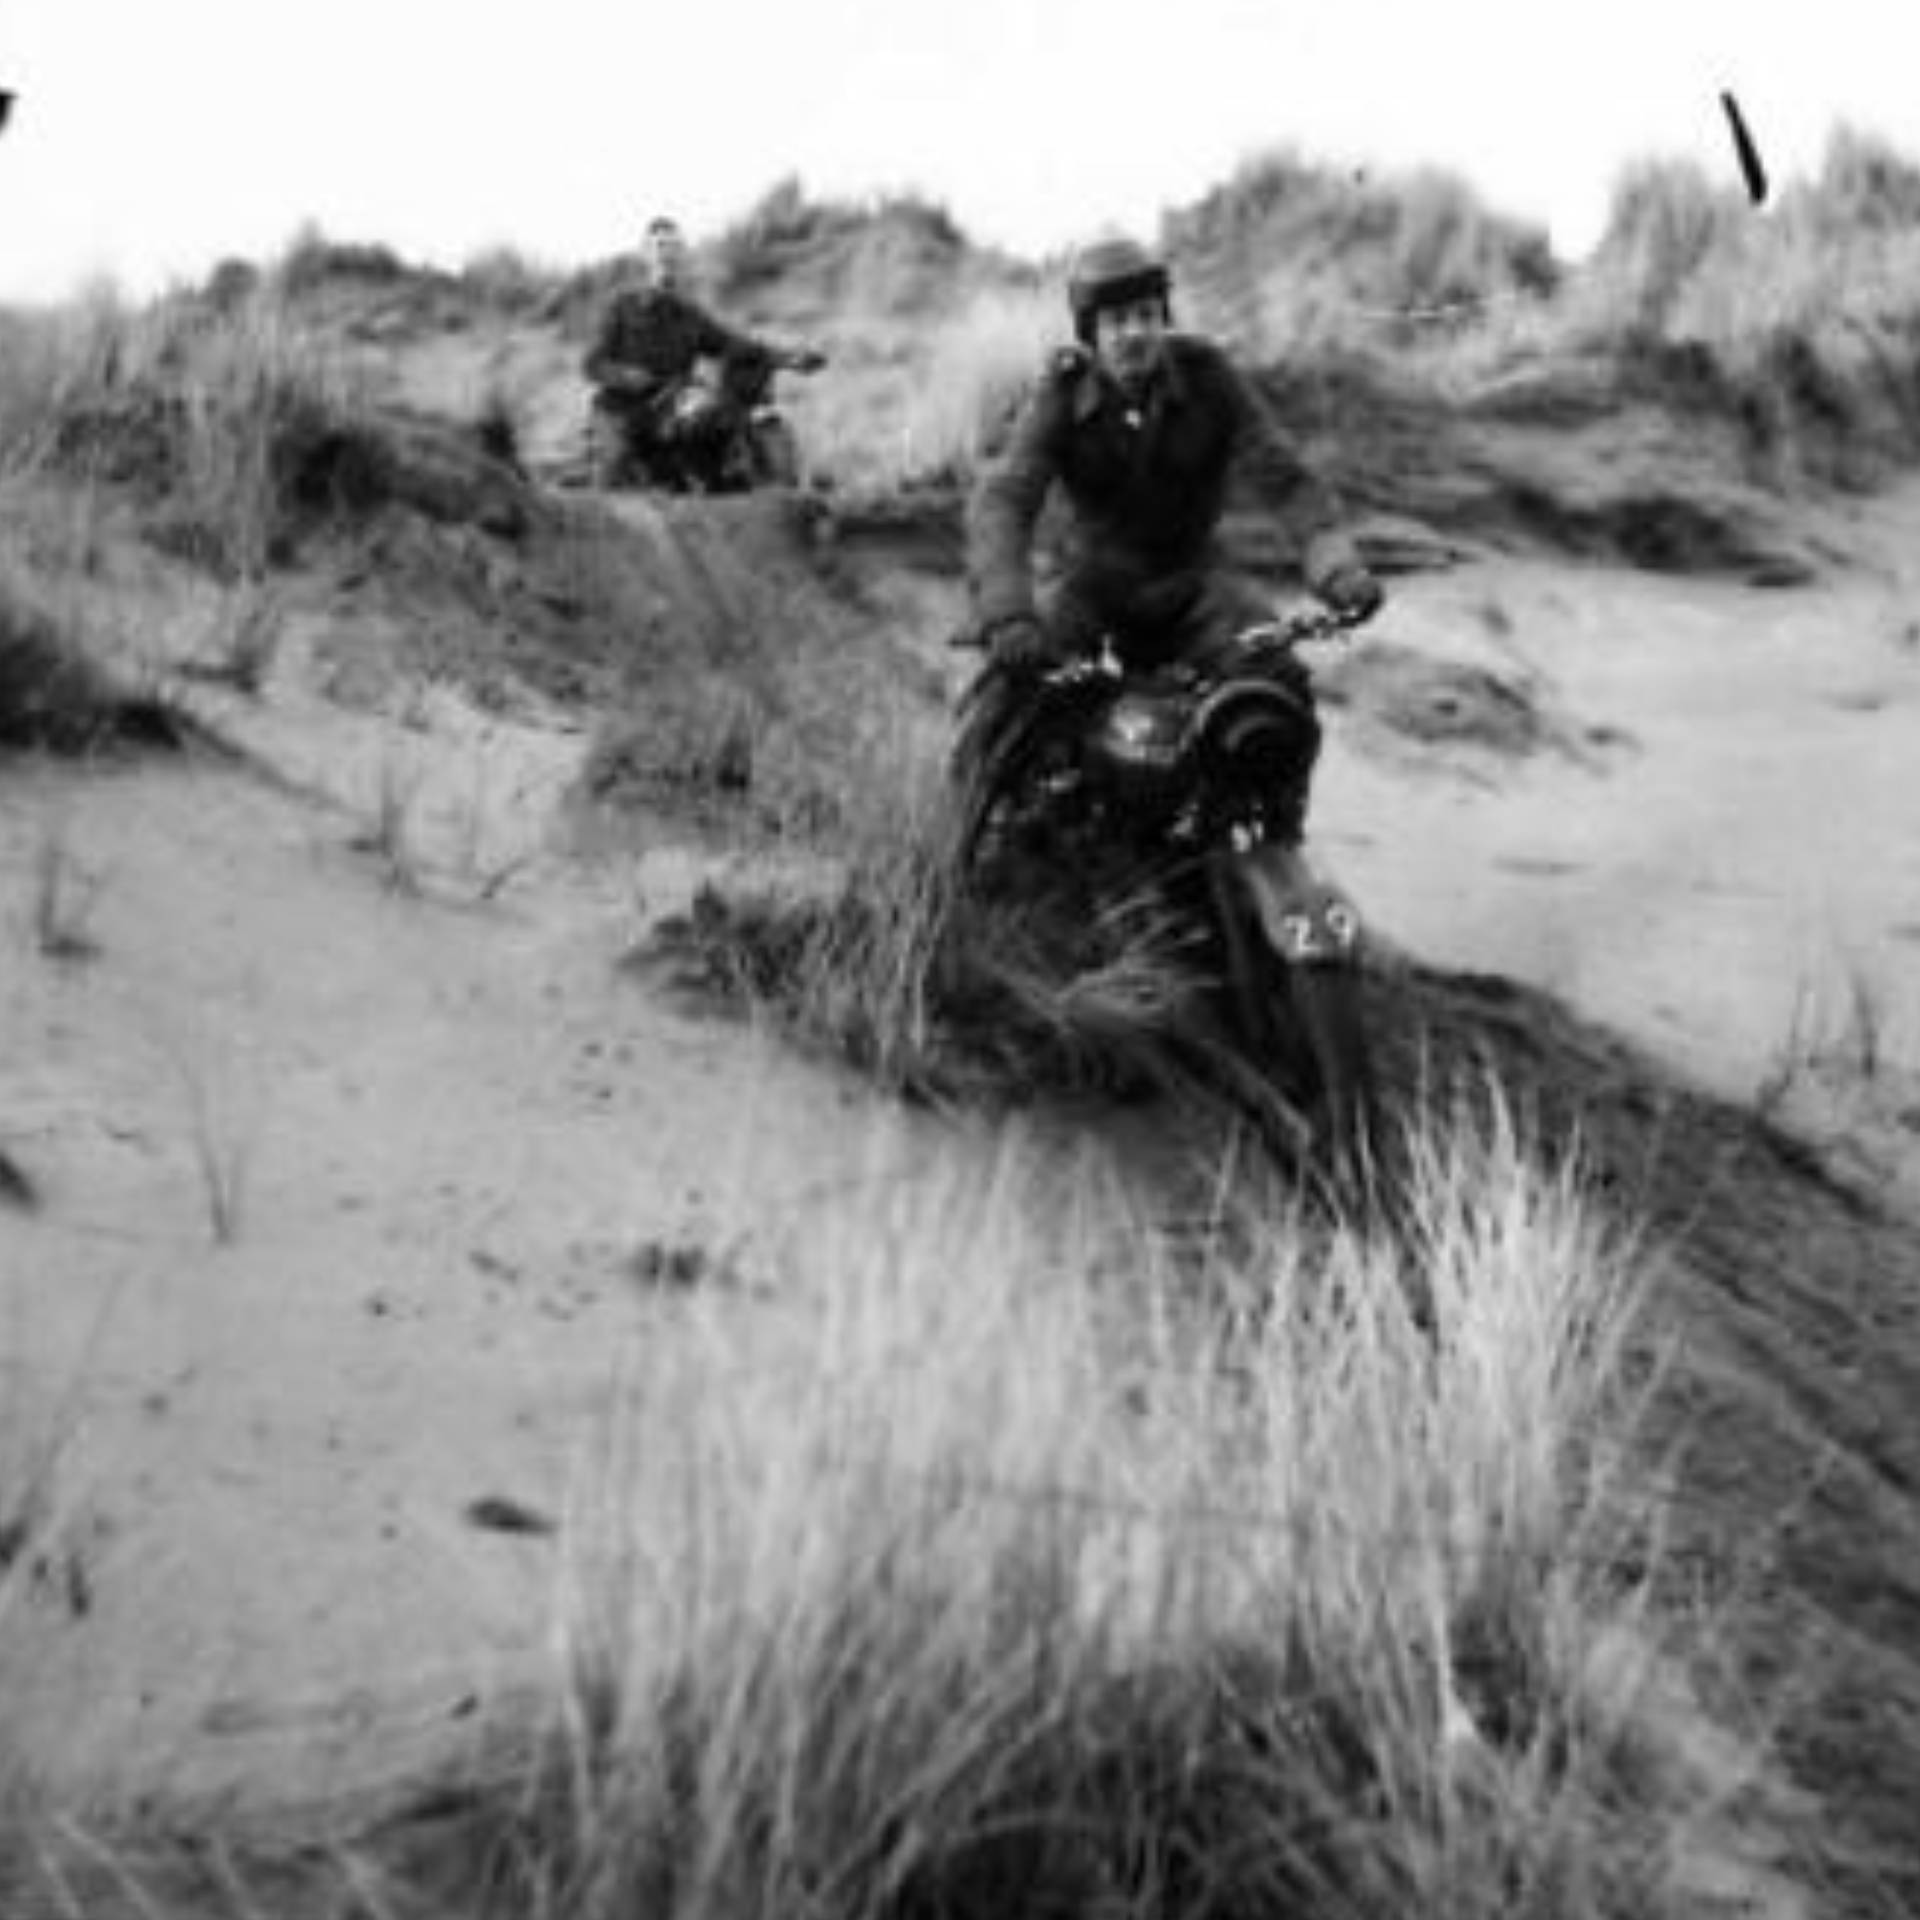 Motorcyclists of 59th (Staffordshire) Reconnaissance Regiment learning 